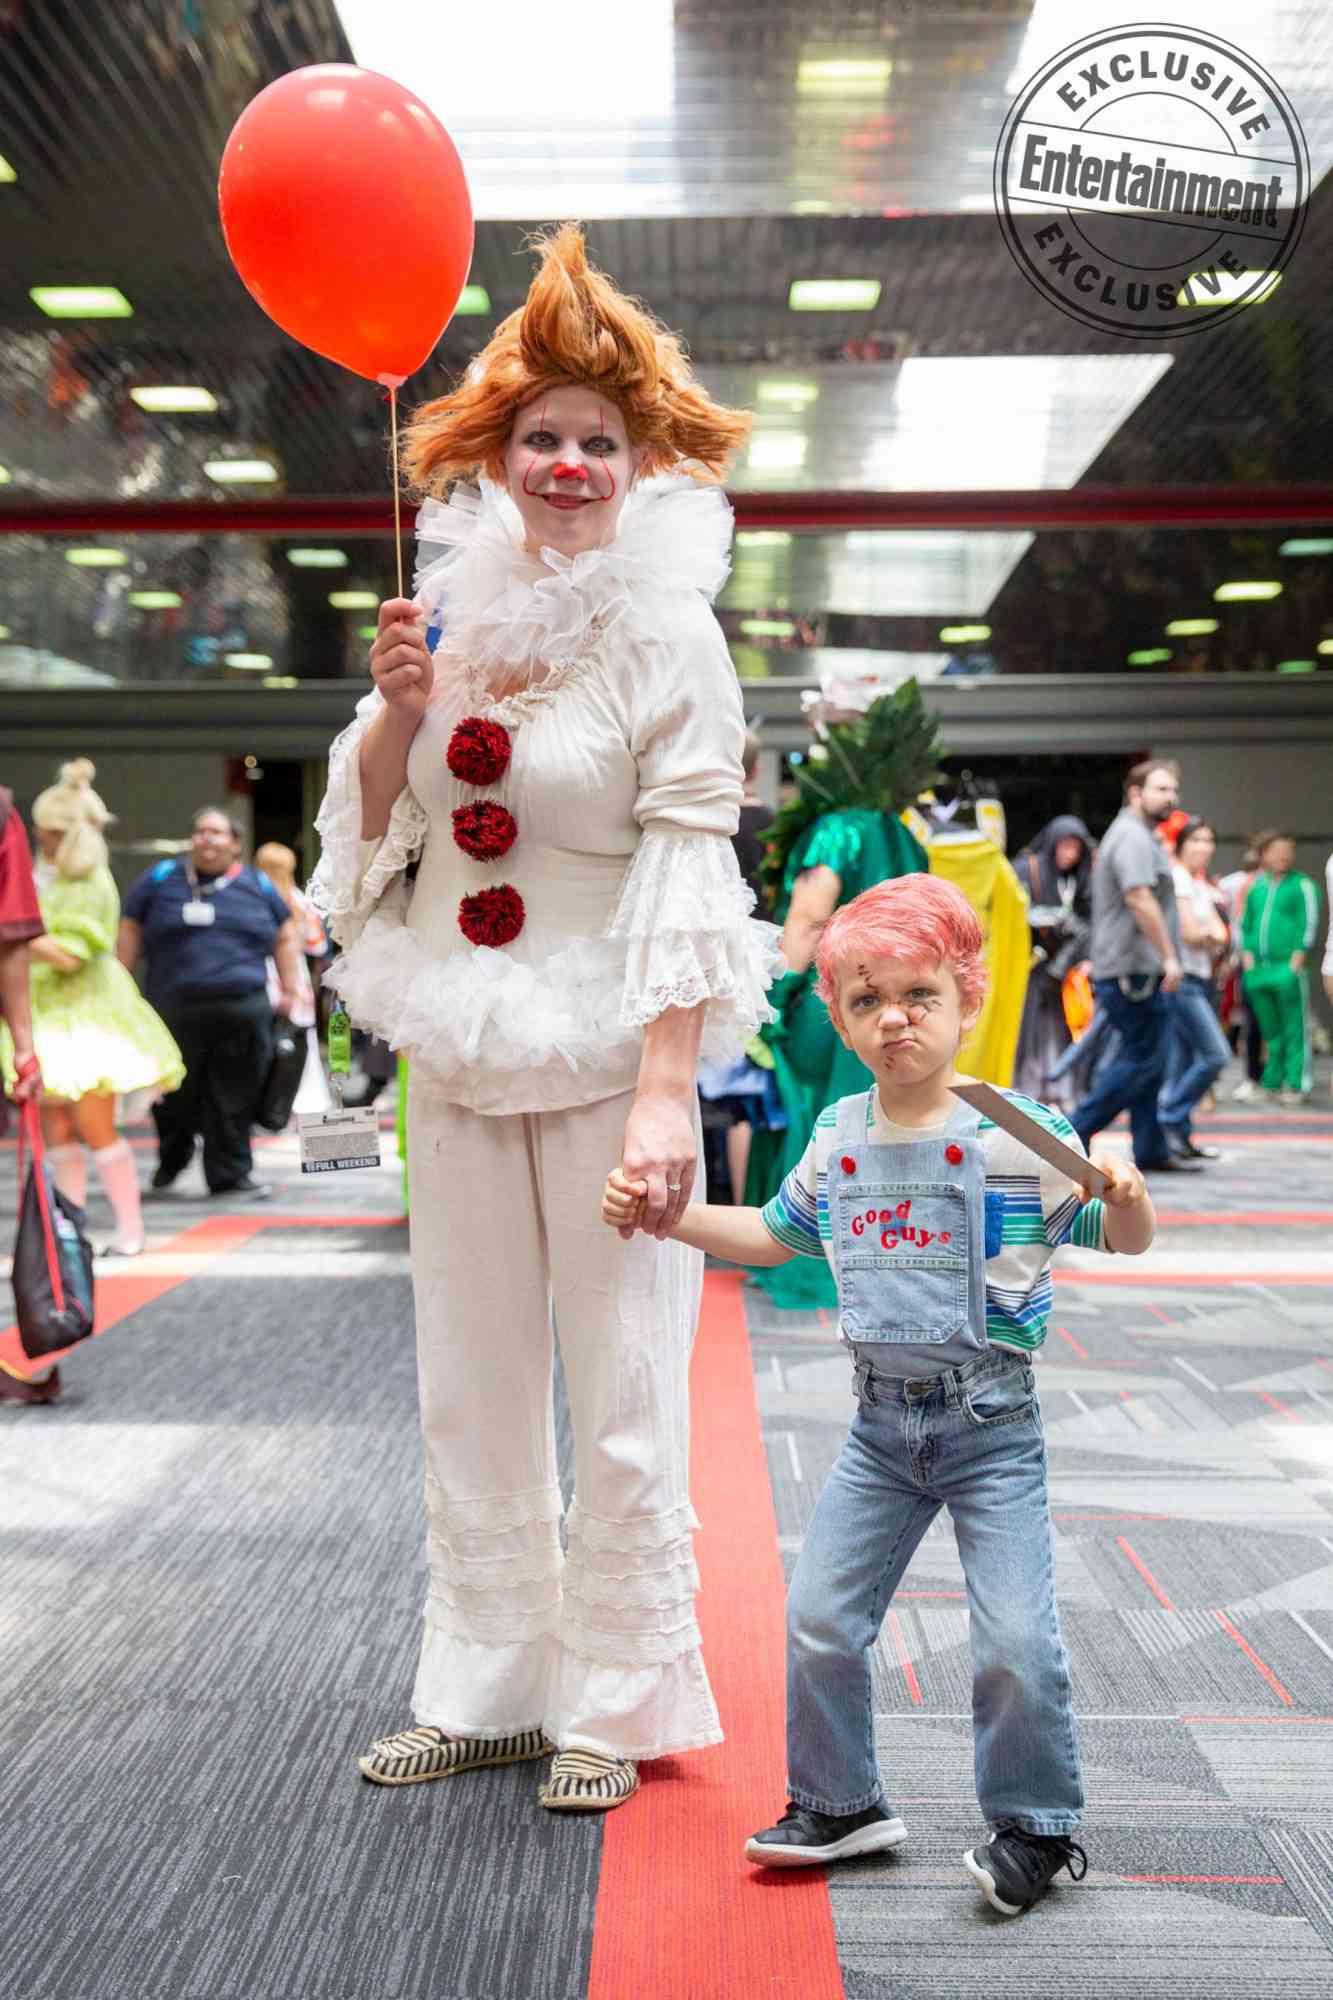 Anime Central 2019 cosplayers photographed on May 18th and 19th in Chicago, IL by Chris Cosgrove for Entertainment Weekly. -- Pictured: Pennywise from It and Chucky from Child's Play cosplayers